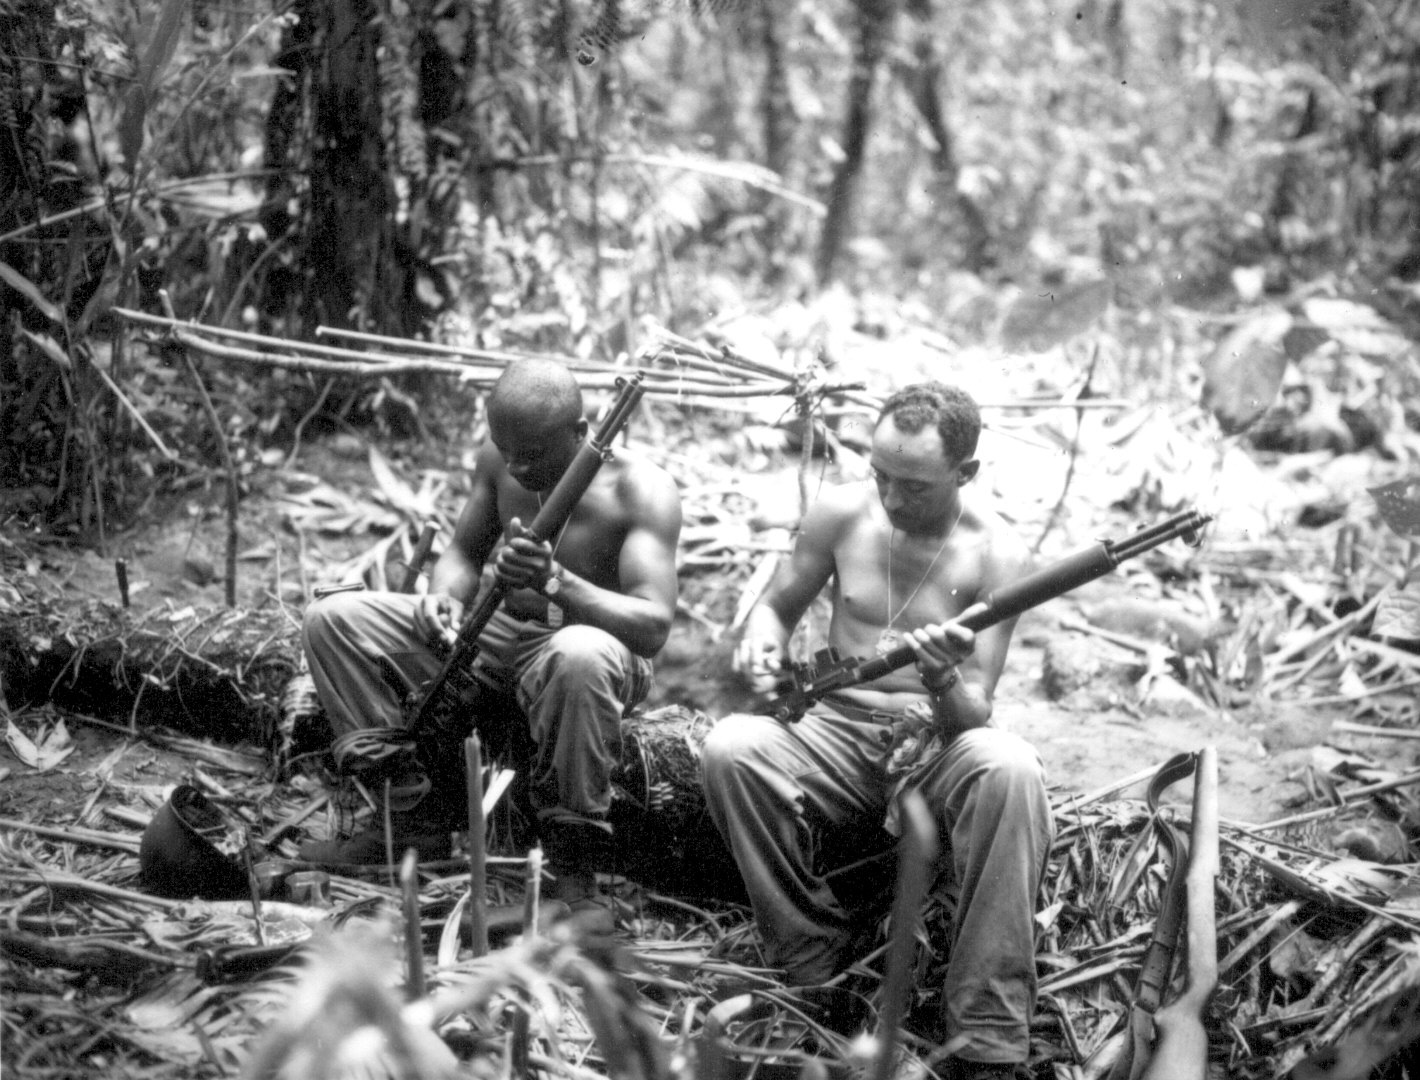 Sergeant John Cark and Staff Sergeant Ford Shaw of E Company, 25th Combat Team, US Army 93rd Division cleaning their rifles alongside the East West Trail, Bougainville, Solomon Islands, 4 Apr 1944